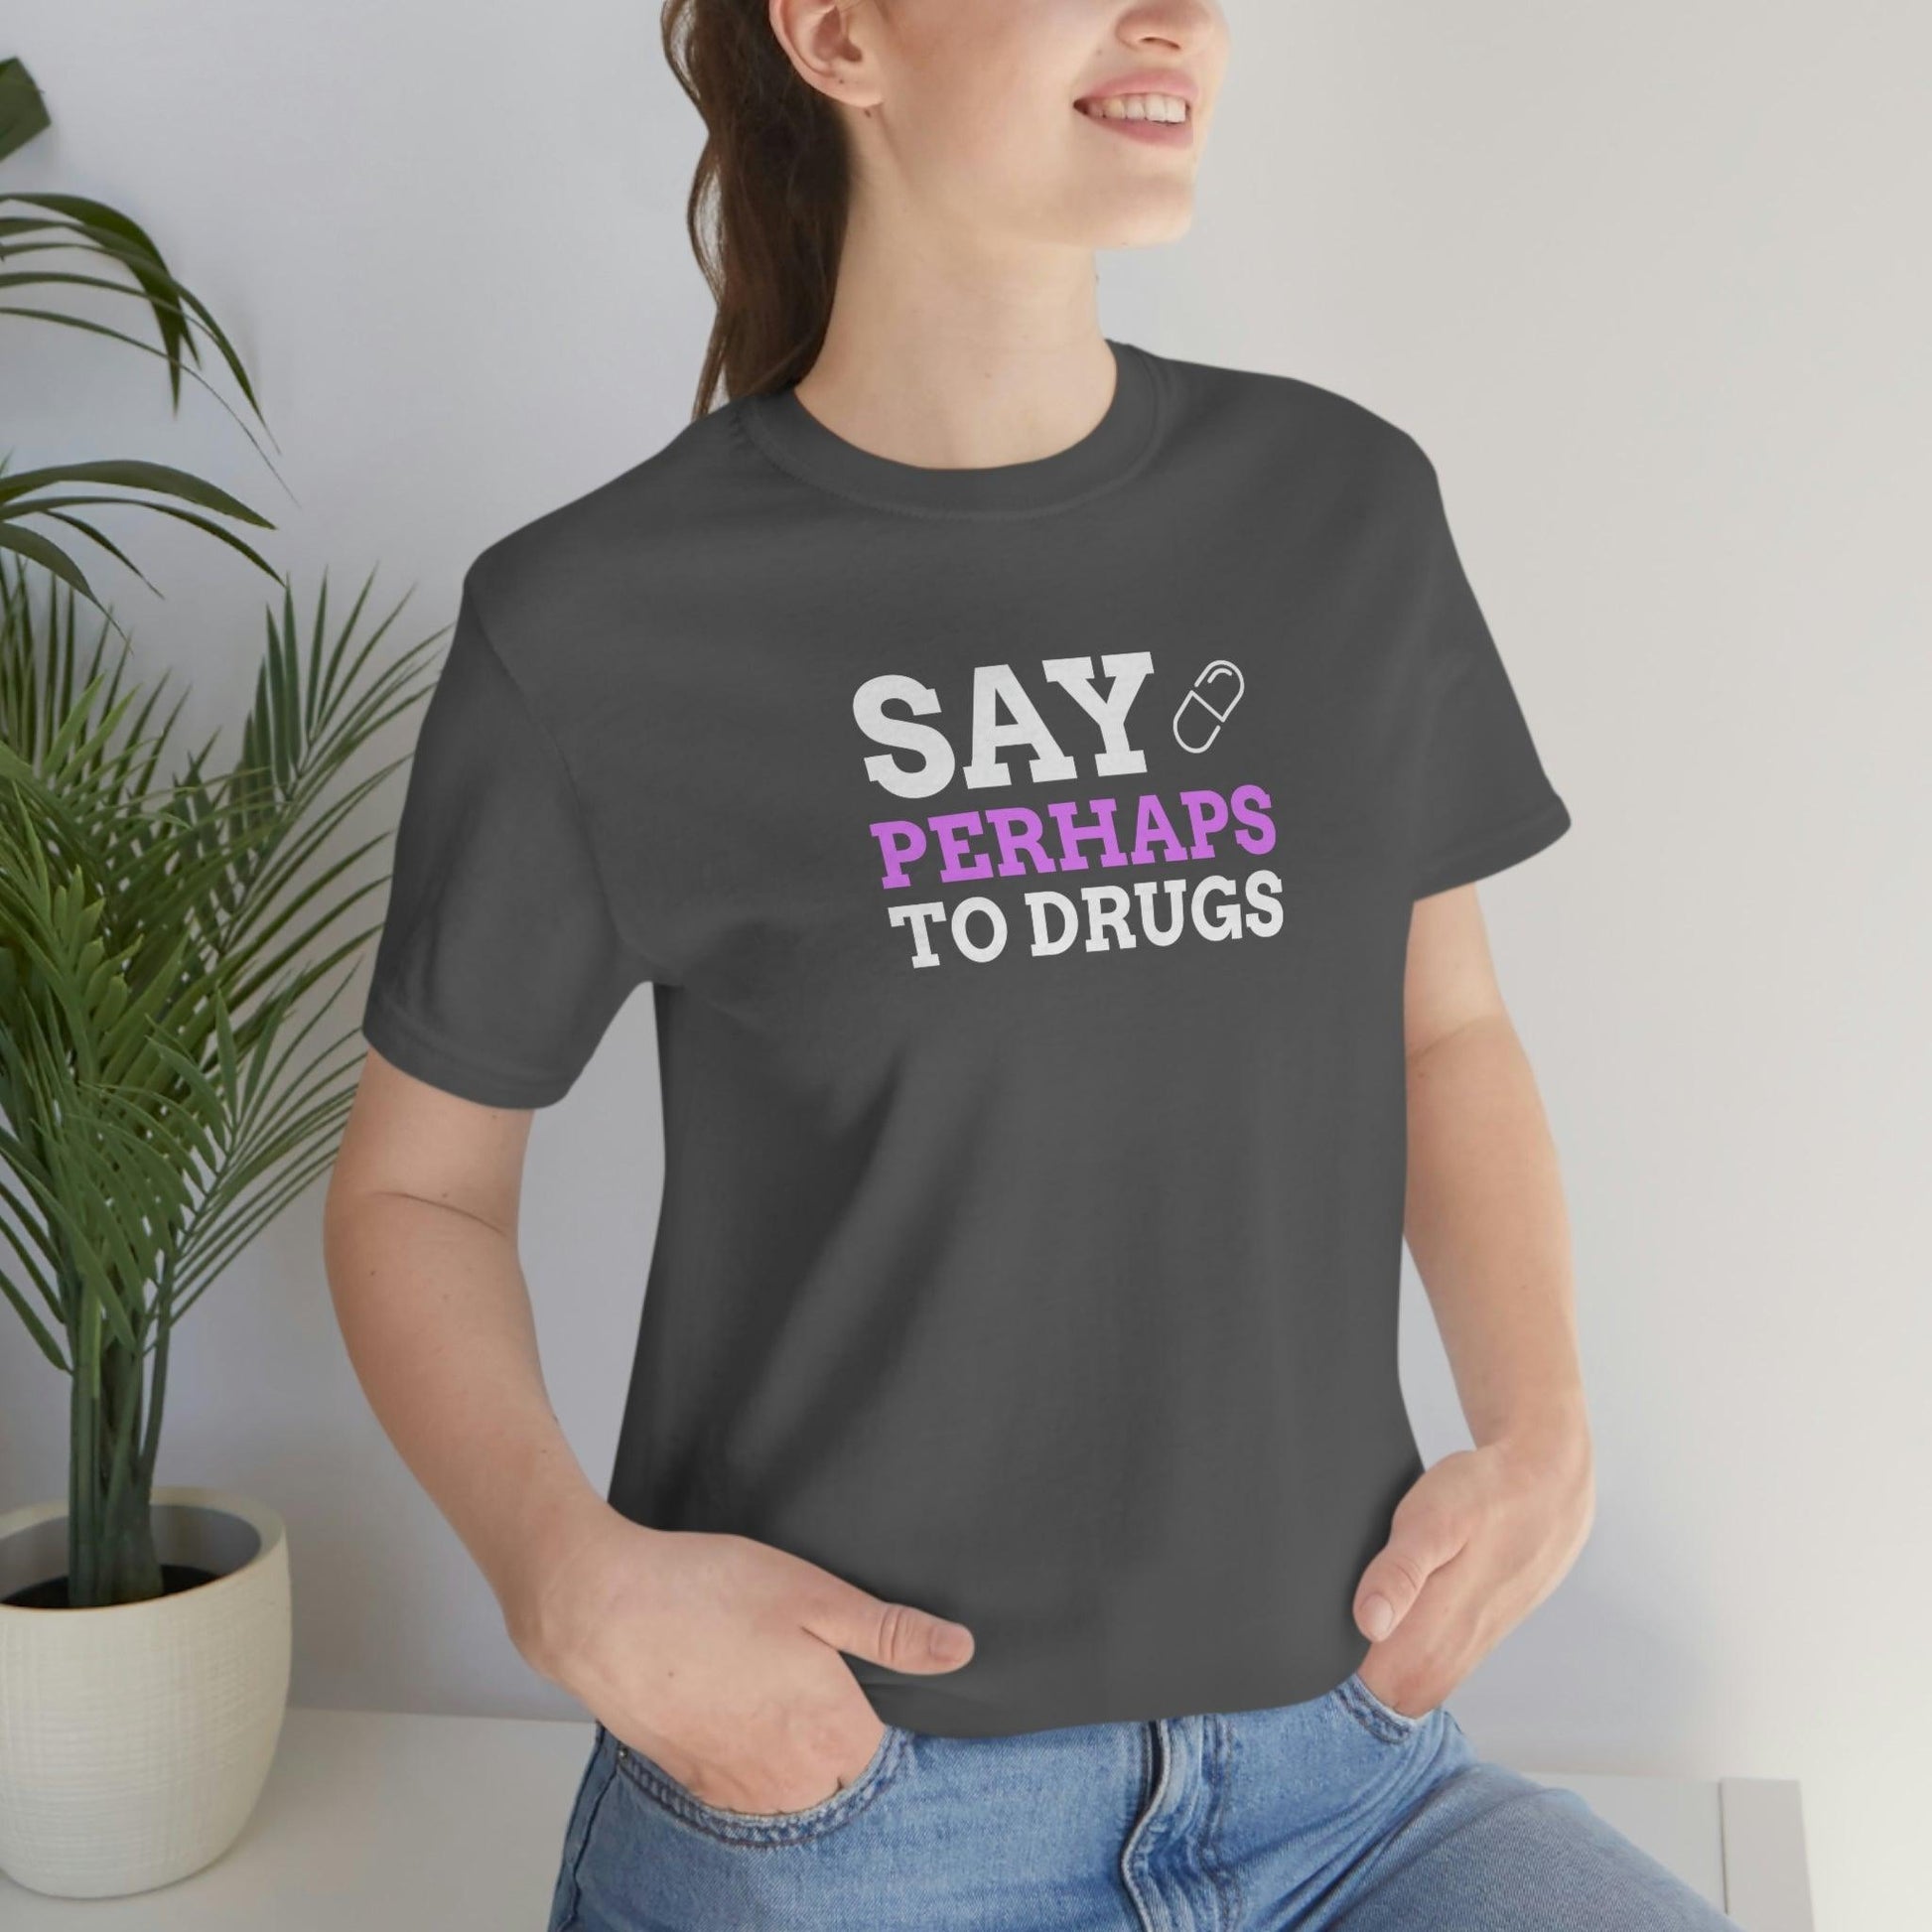 Say Perhaps To Drugs - Wicked Naughty Apparel